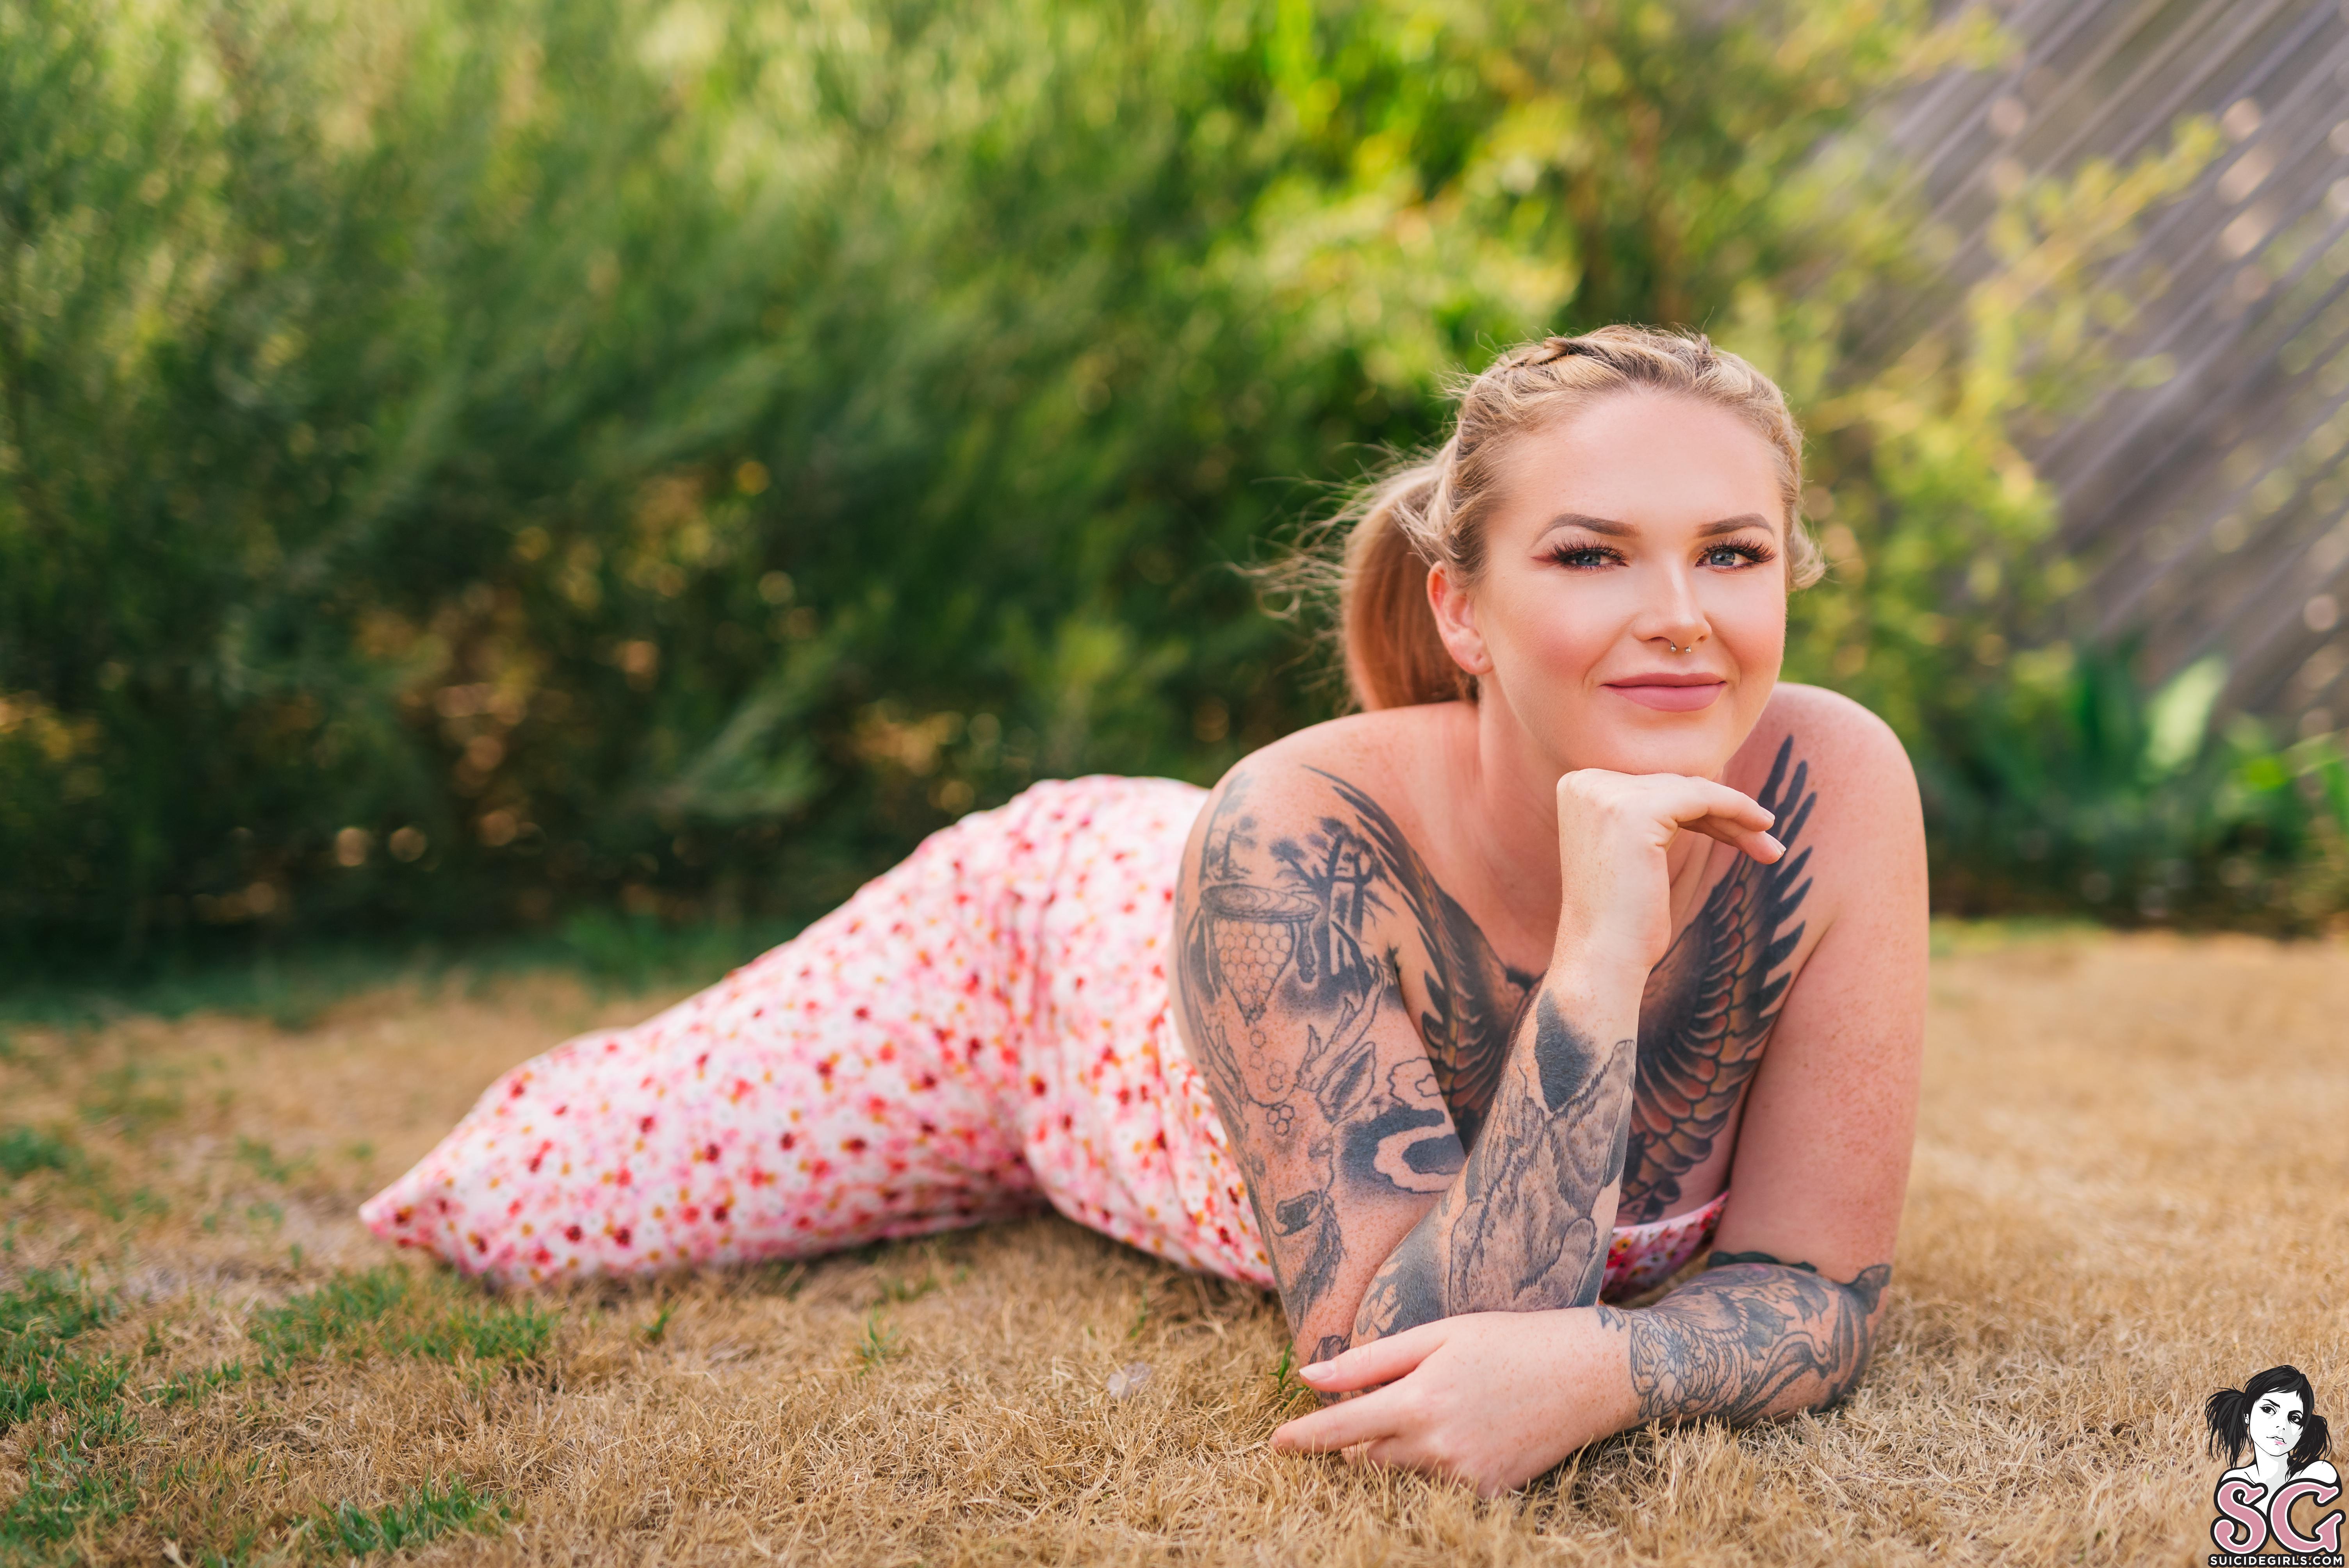 People 6016x4016 Vicfox Suicide Suicide Girls blurred inked girls chubby blonde blue eyes dress garden nature plants grass women